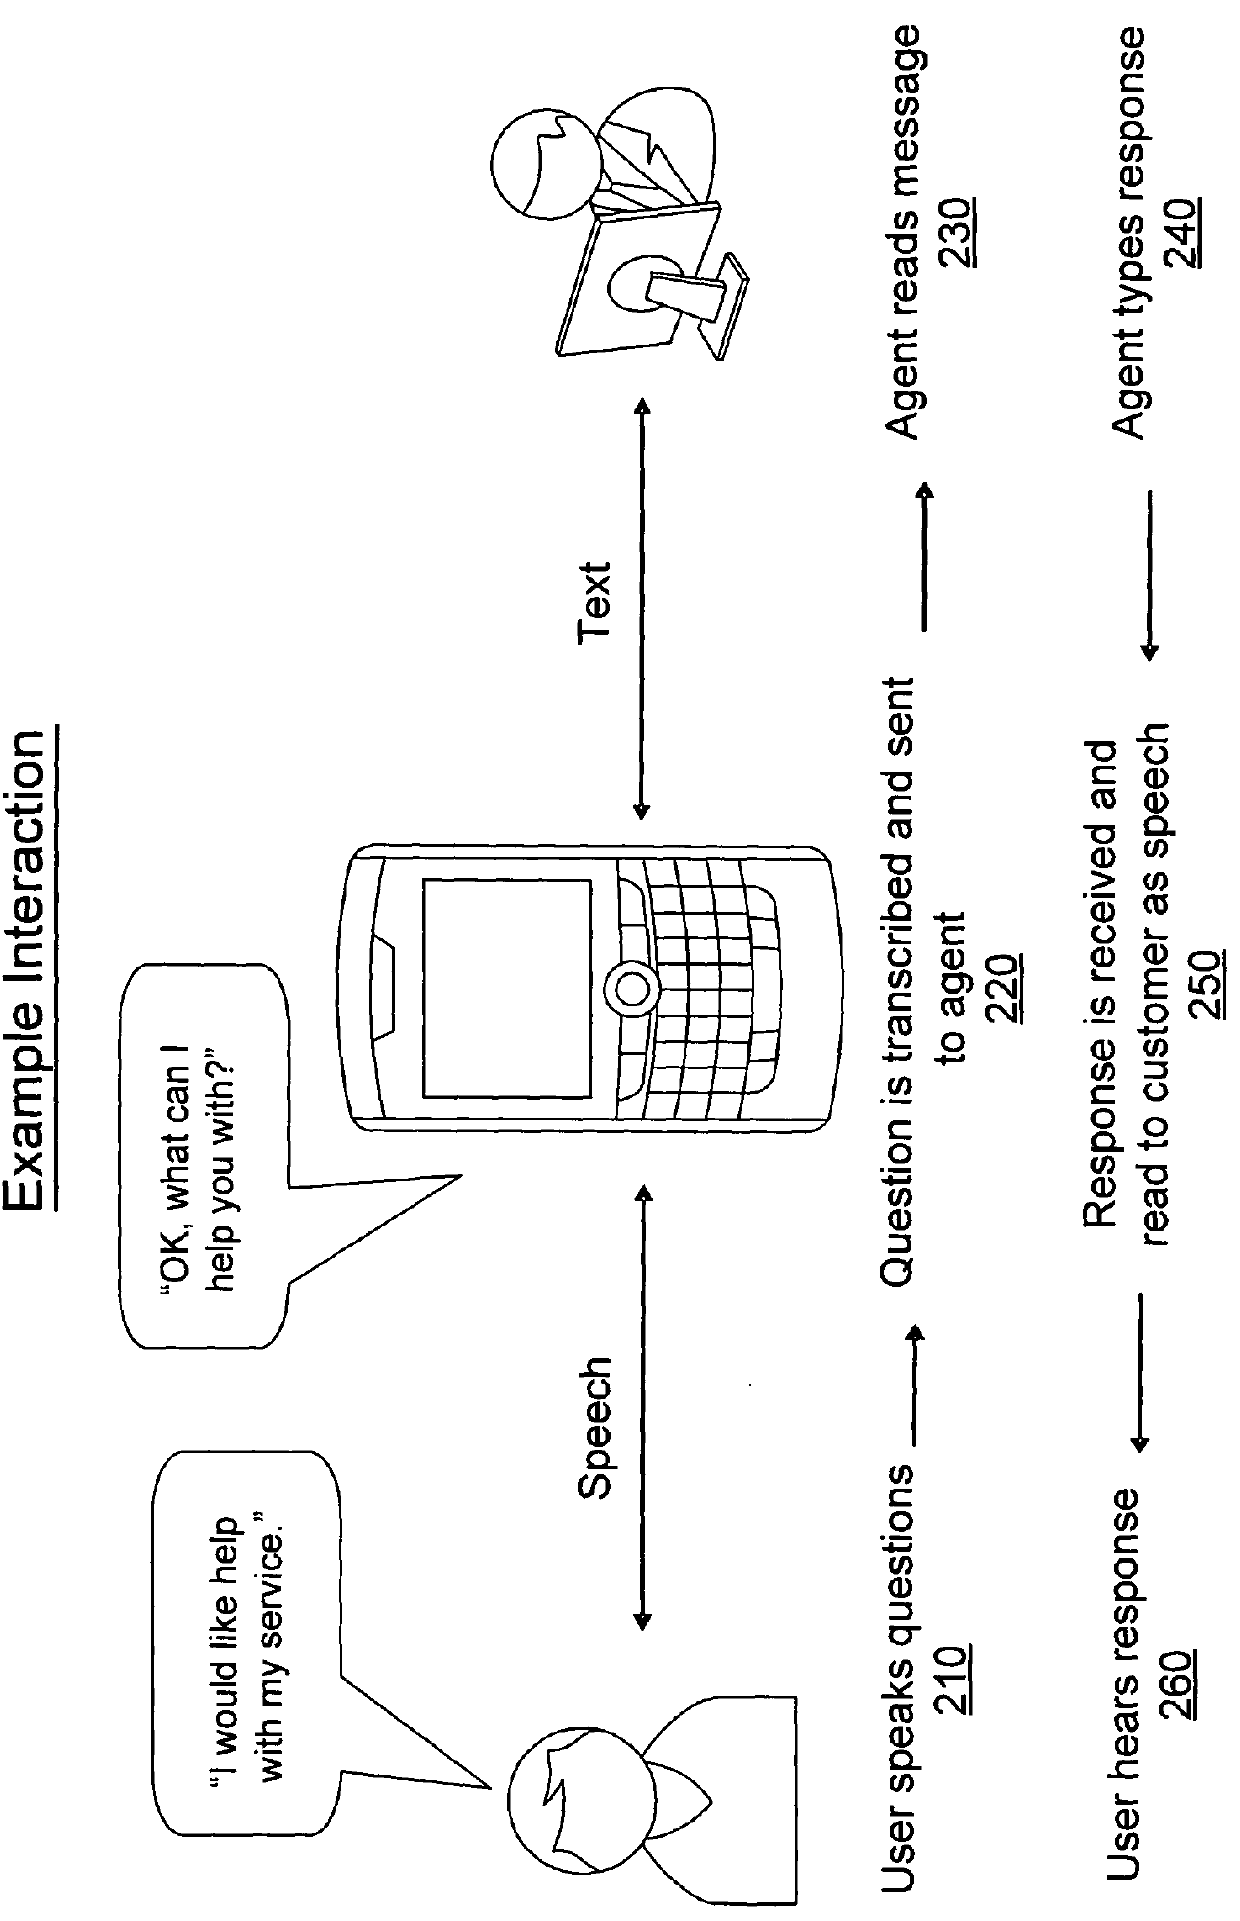 System, method and software program for enabling communications between customer service agents and users of communication devices